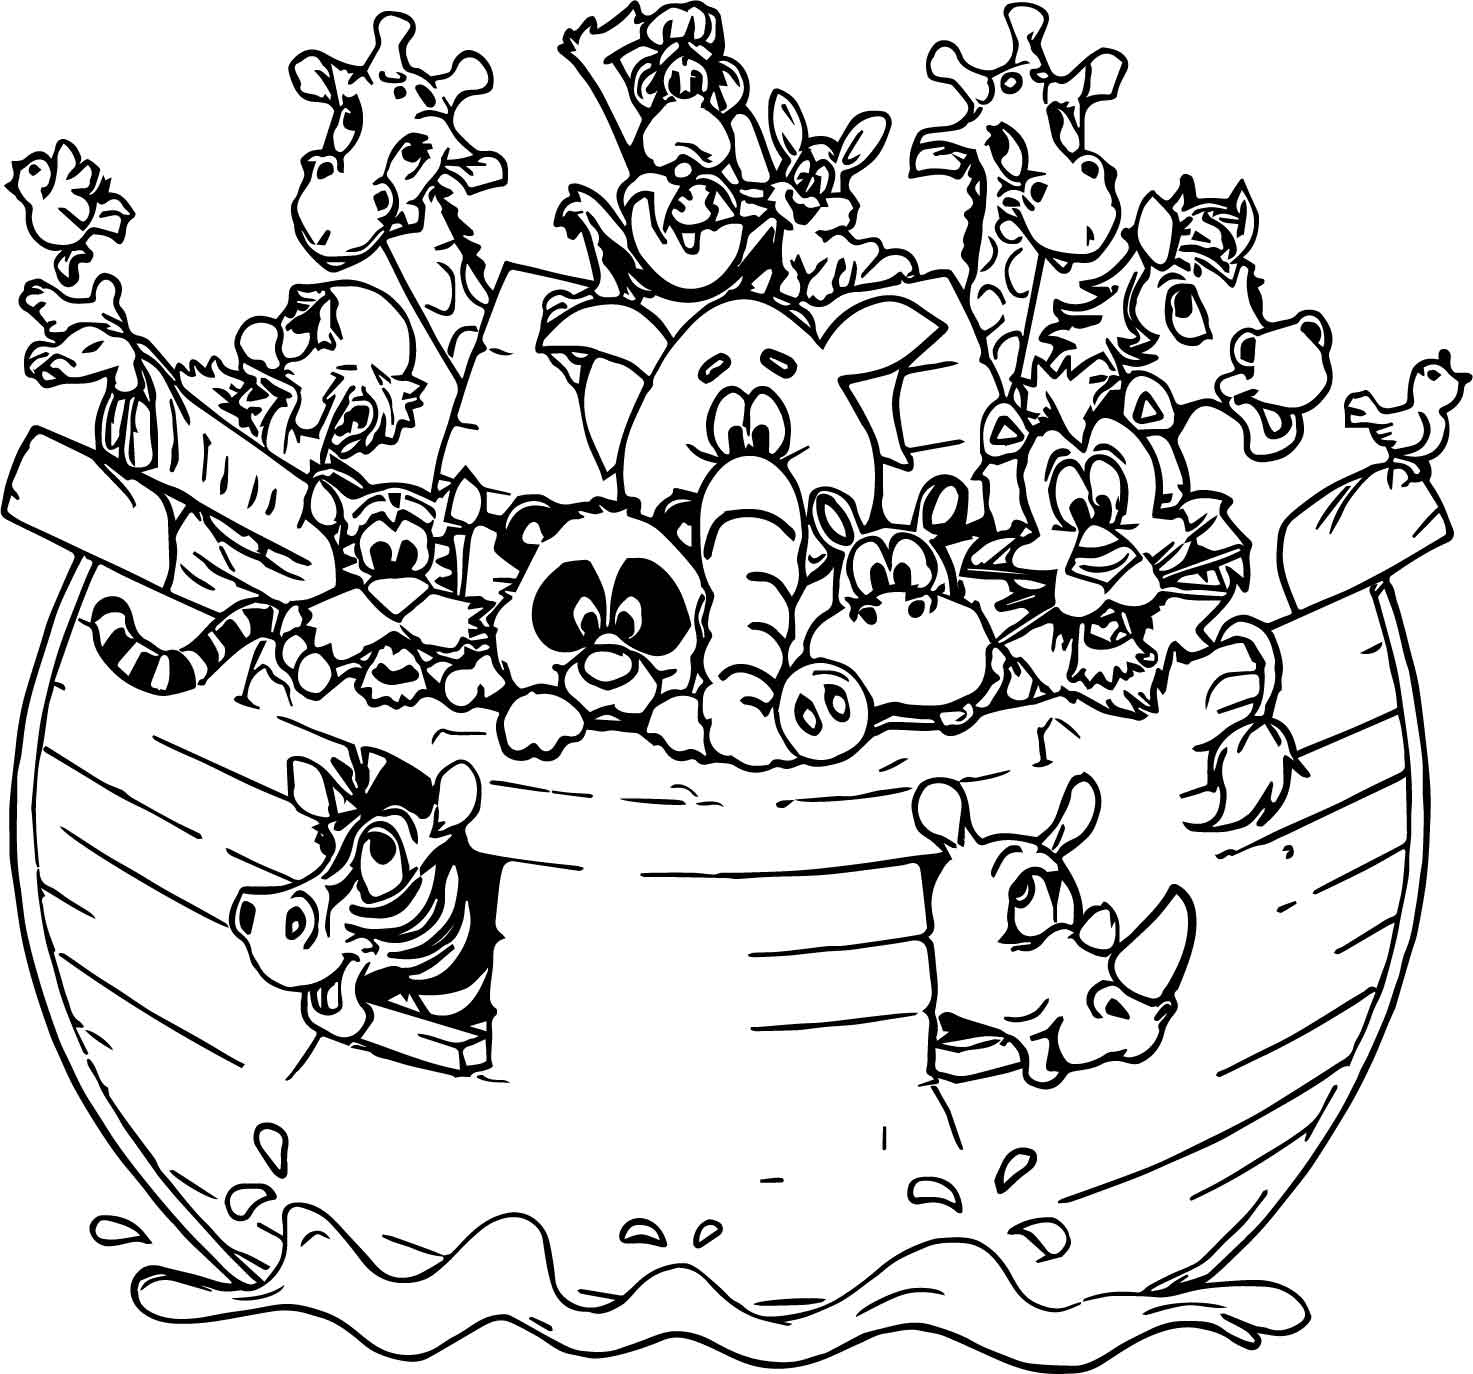 Noah And The Ark Coloring Pages at GetColorings.com | Free printable ...